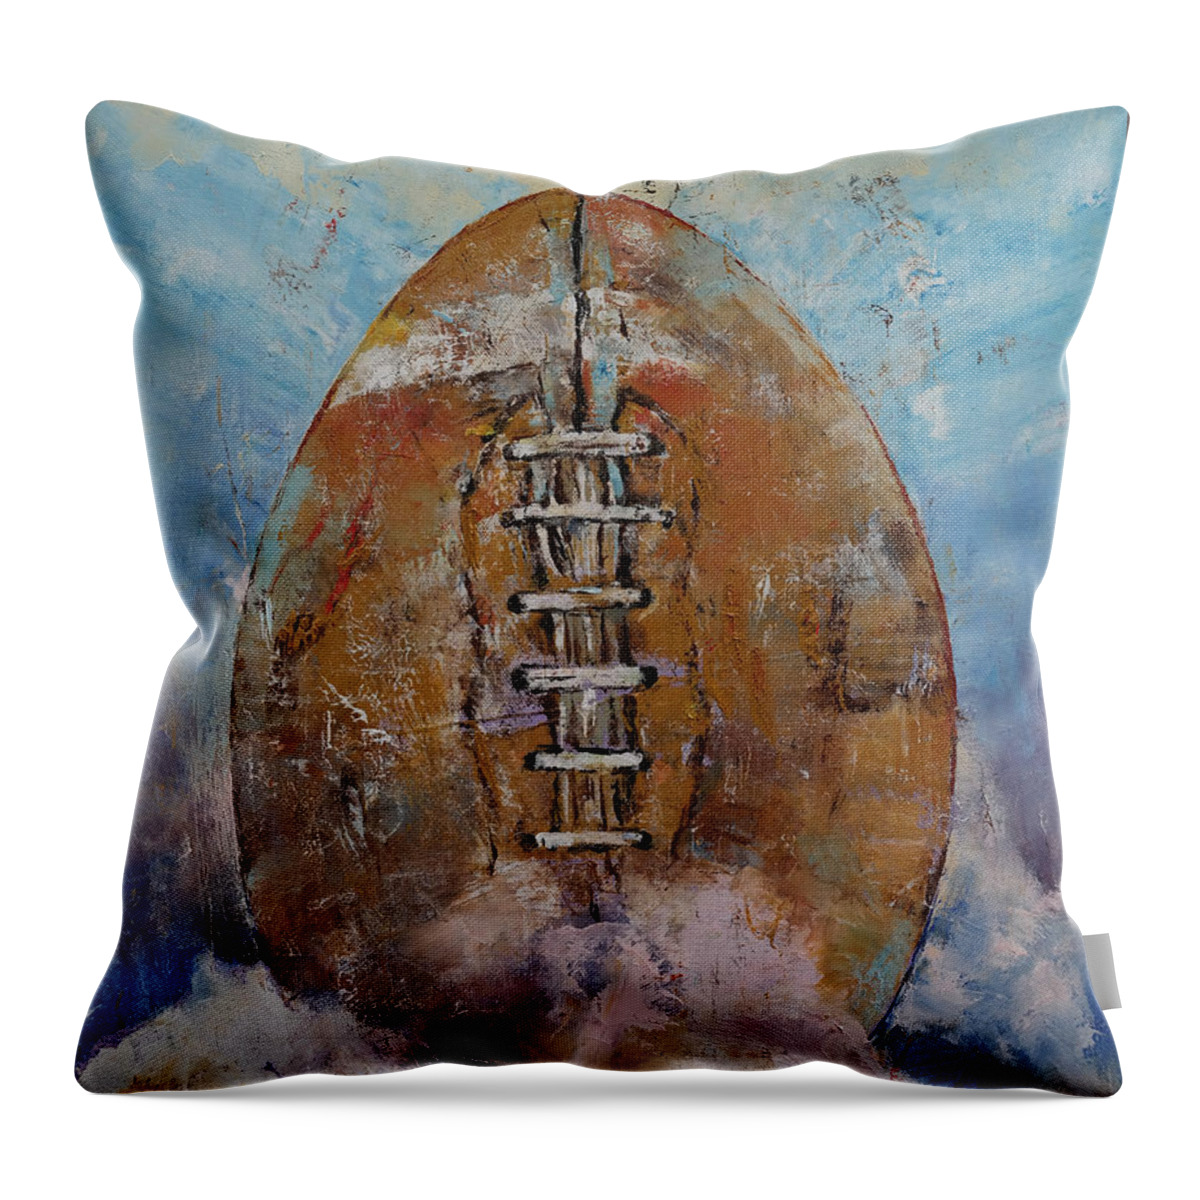 Art Throw Pillow featuring the painting Football by Michael Creese